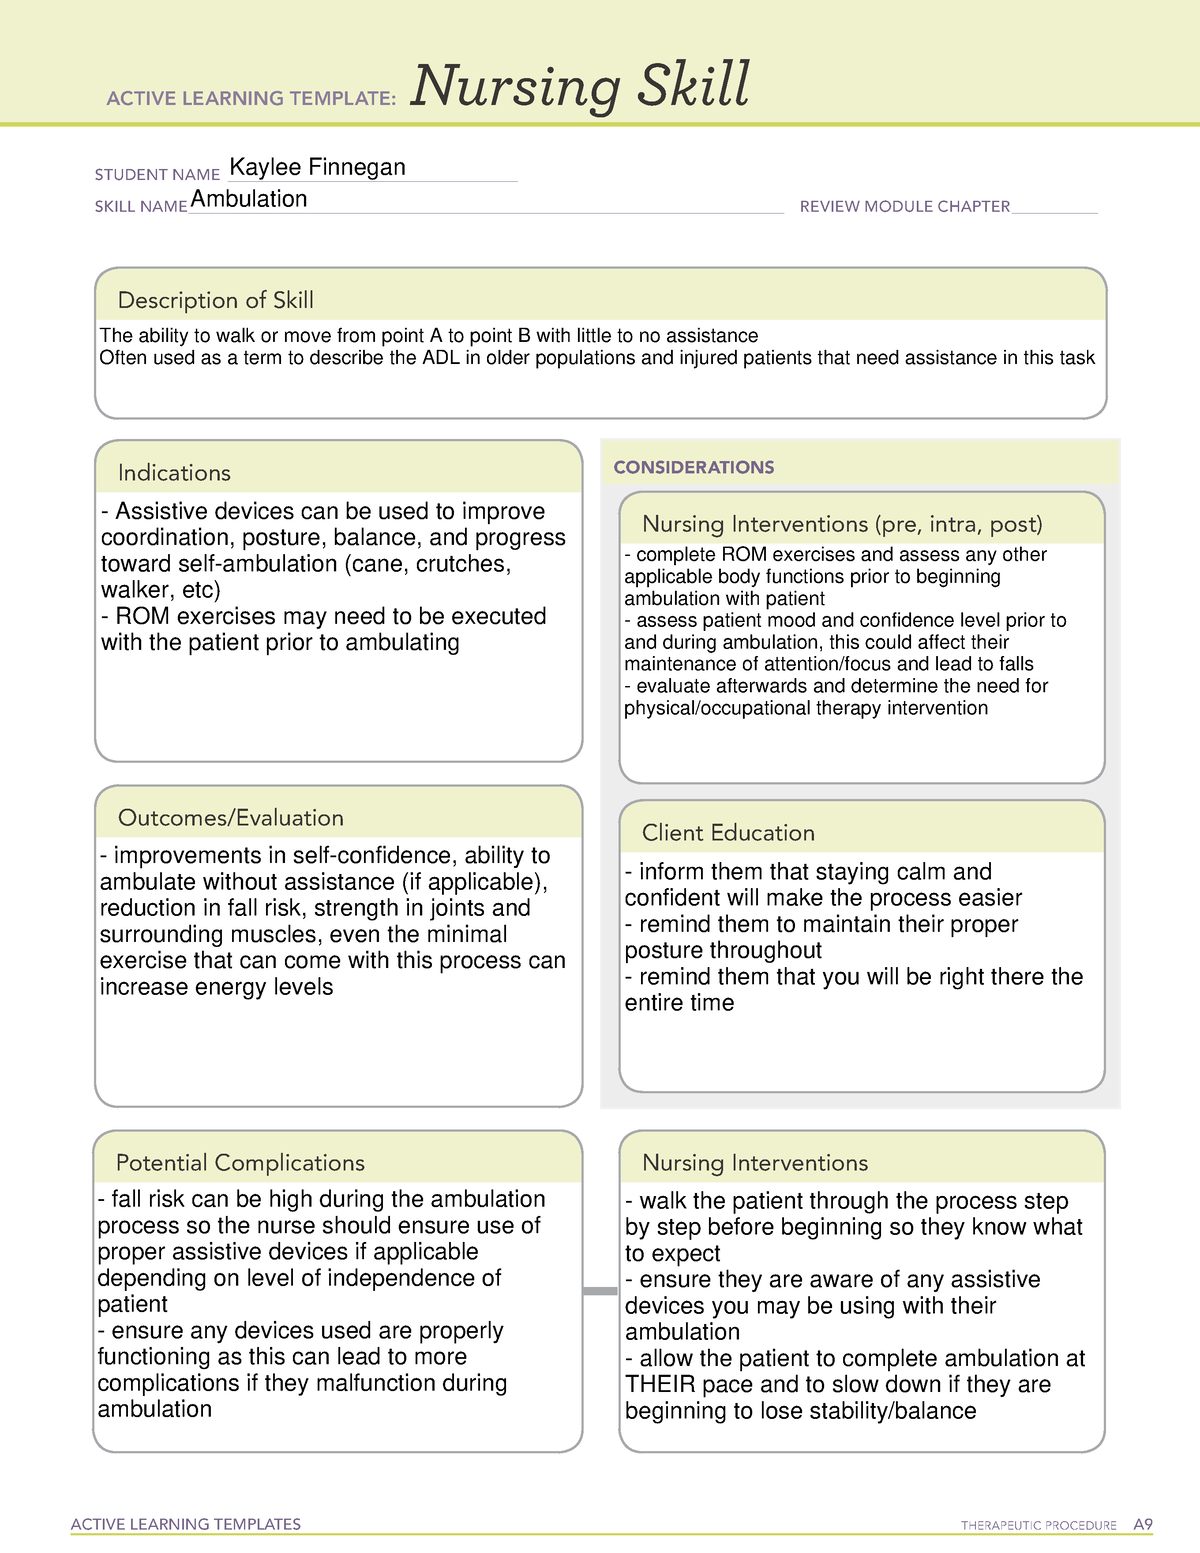 ALT Ambulation - Active learning template for ambulating patients from ...